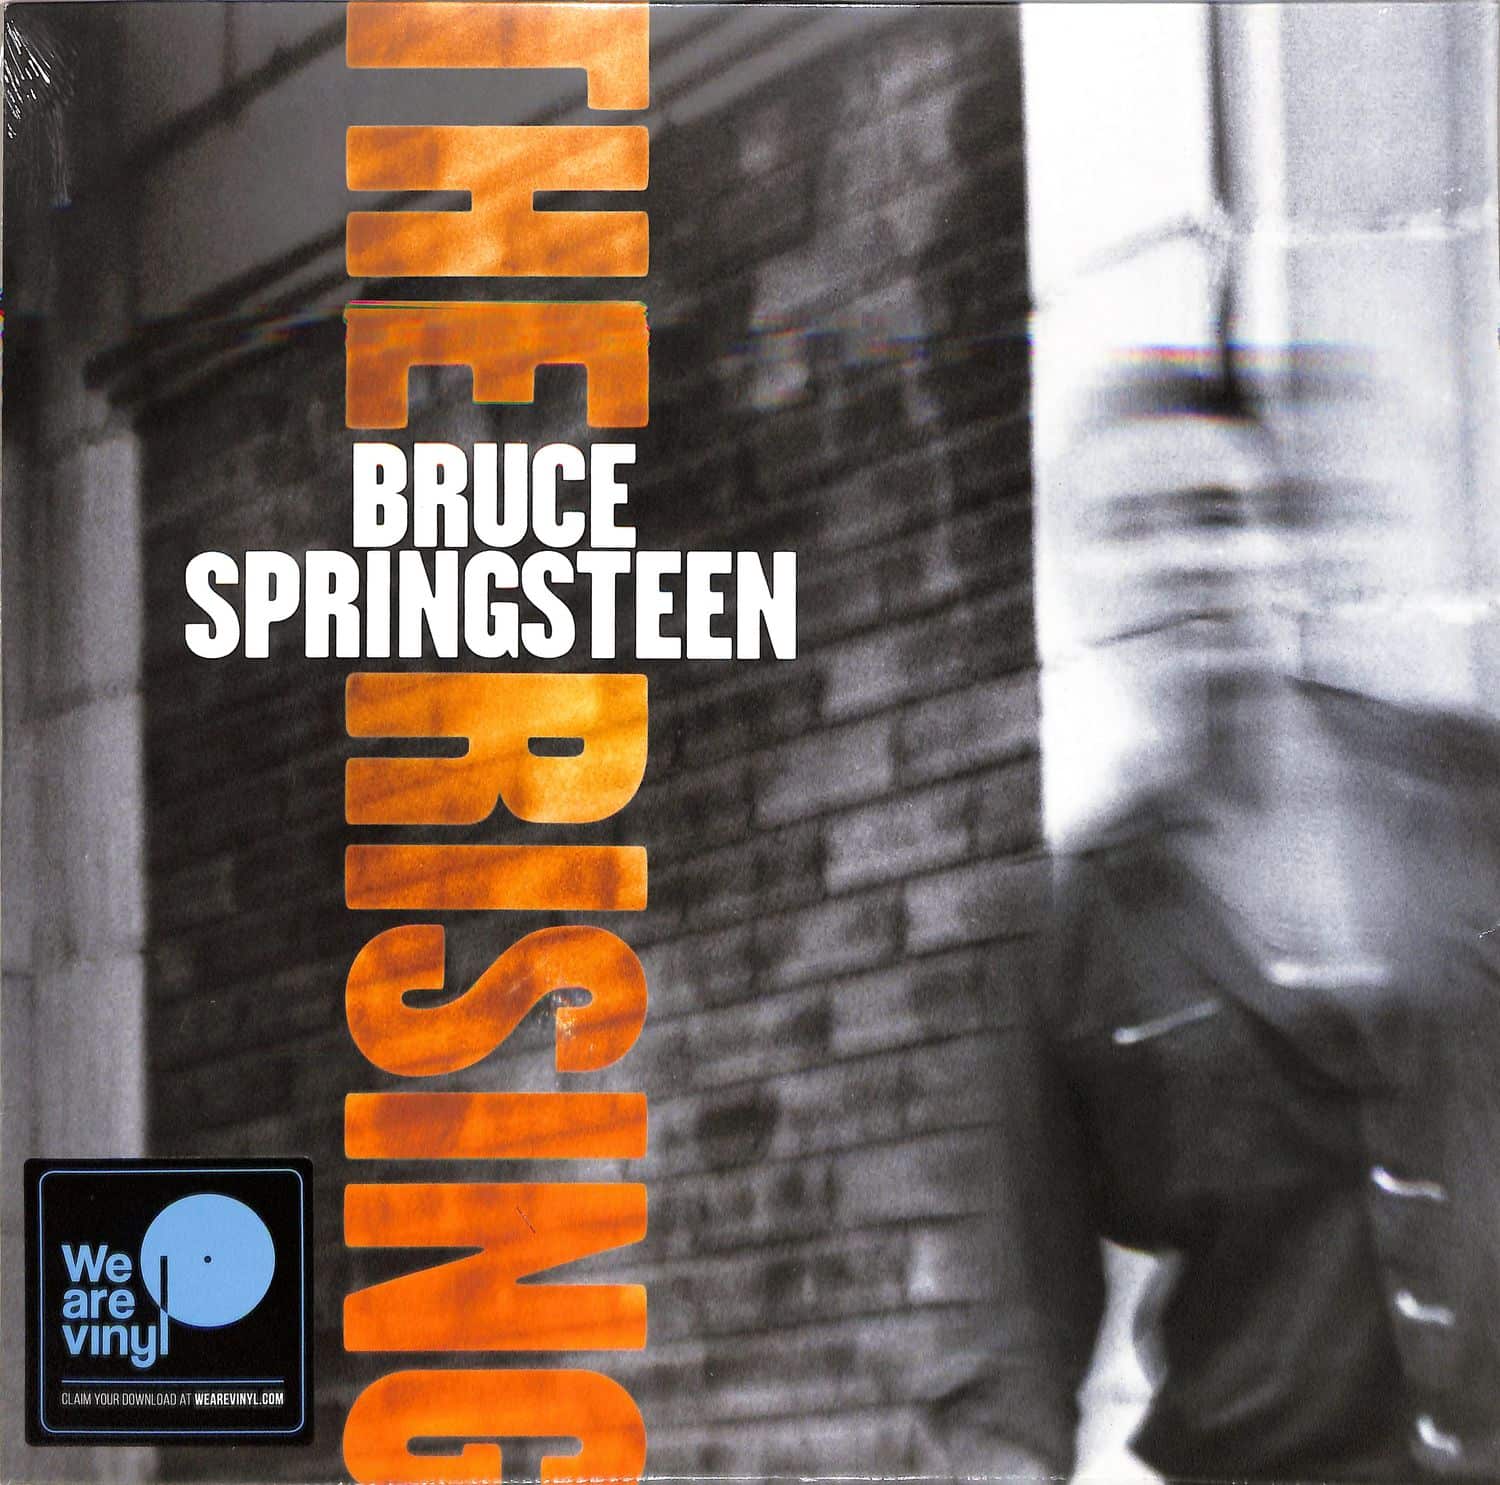 Bruce Springsteen - THE RISING 